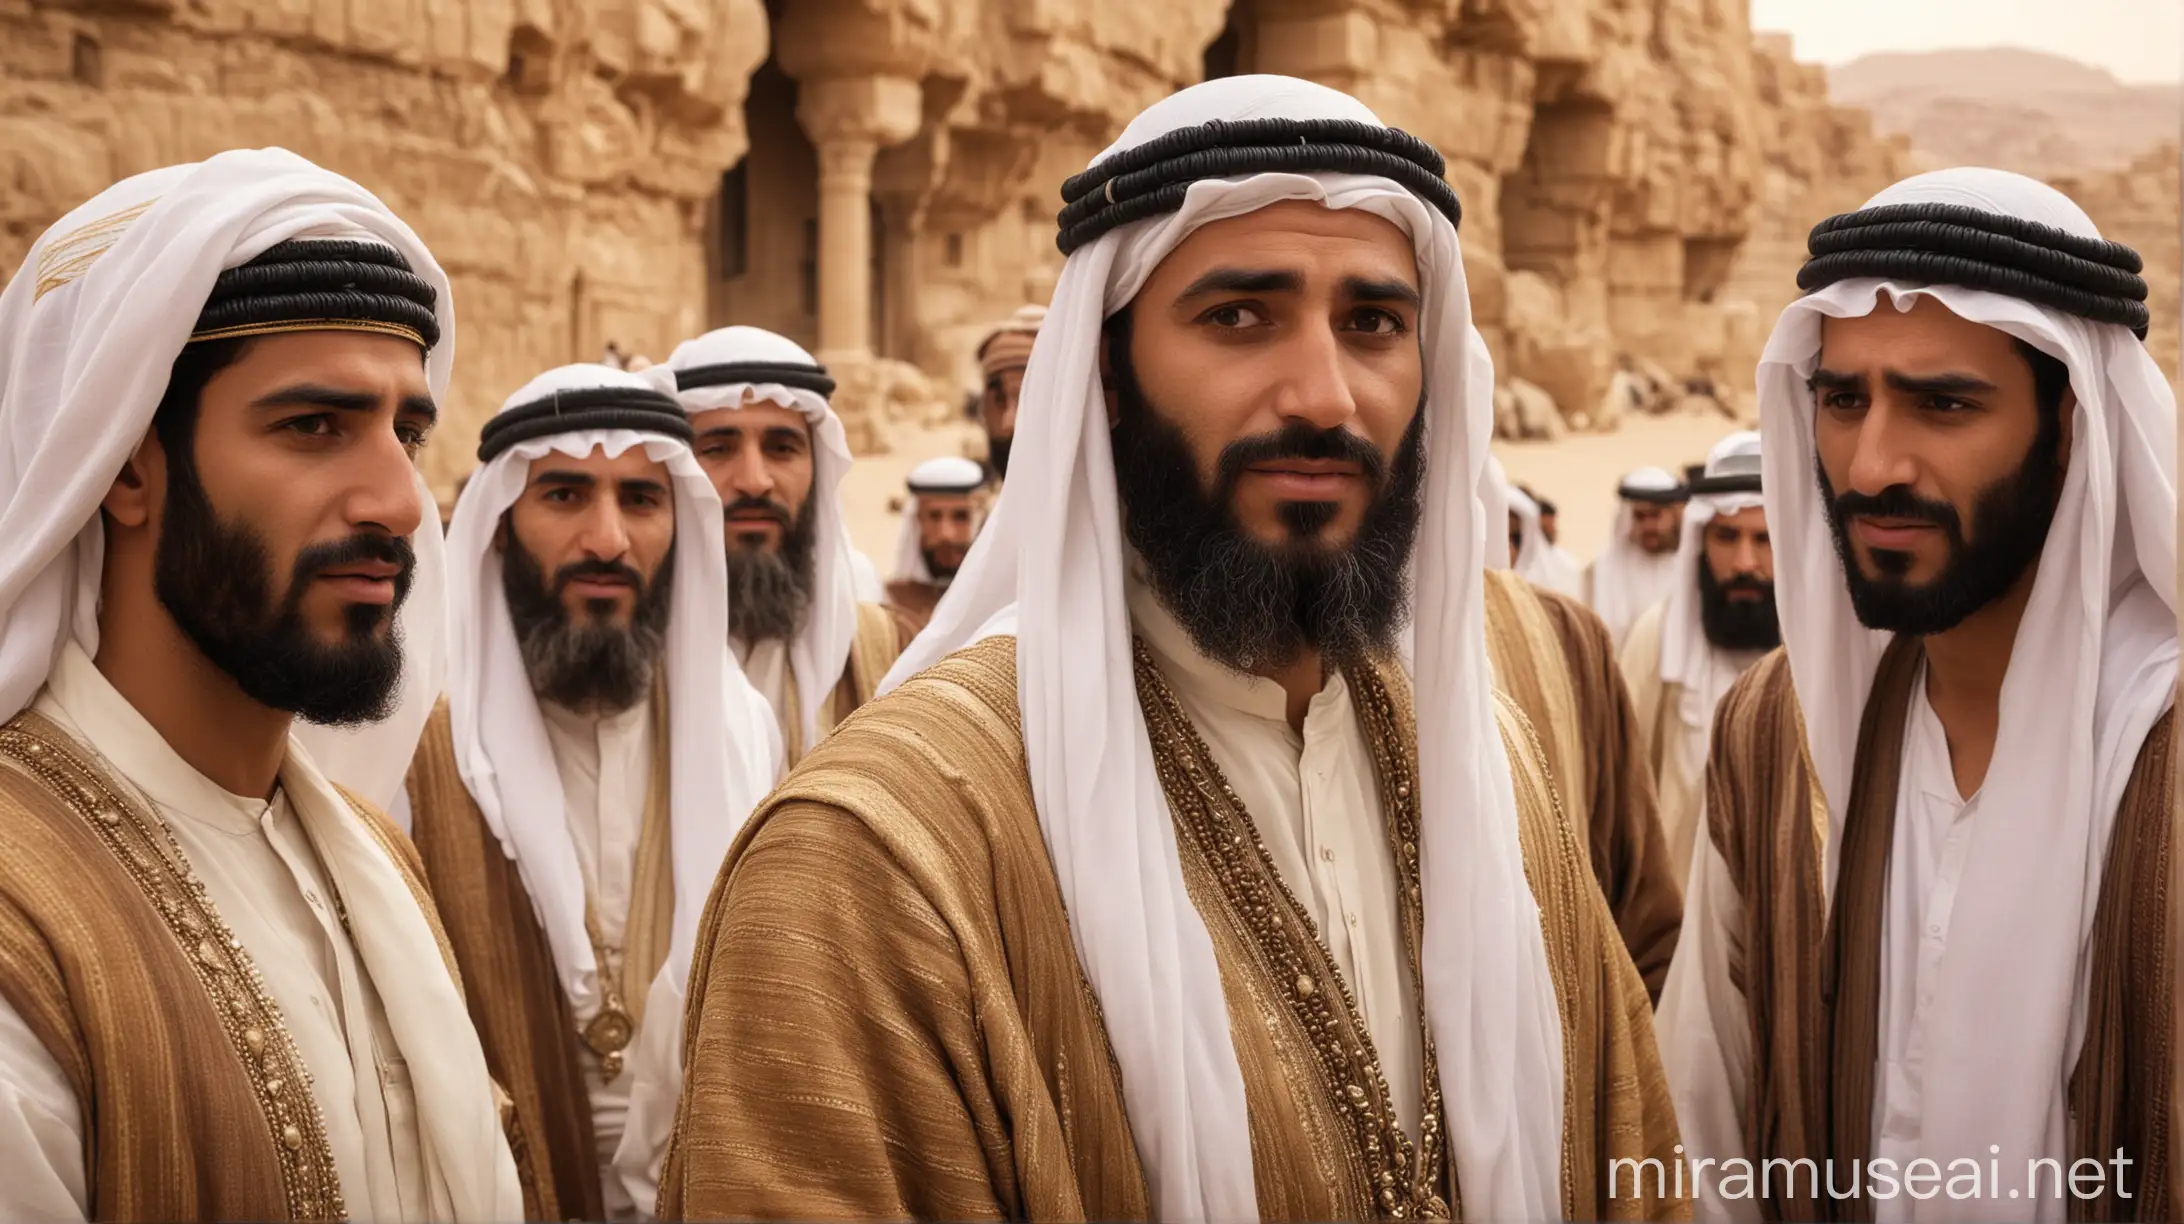 a wealthy looking Arab man talking to about 8 different jewish men. Set in the Middle East, during the Era of the Biblical Moses.